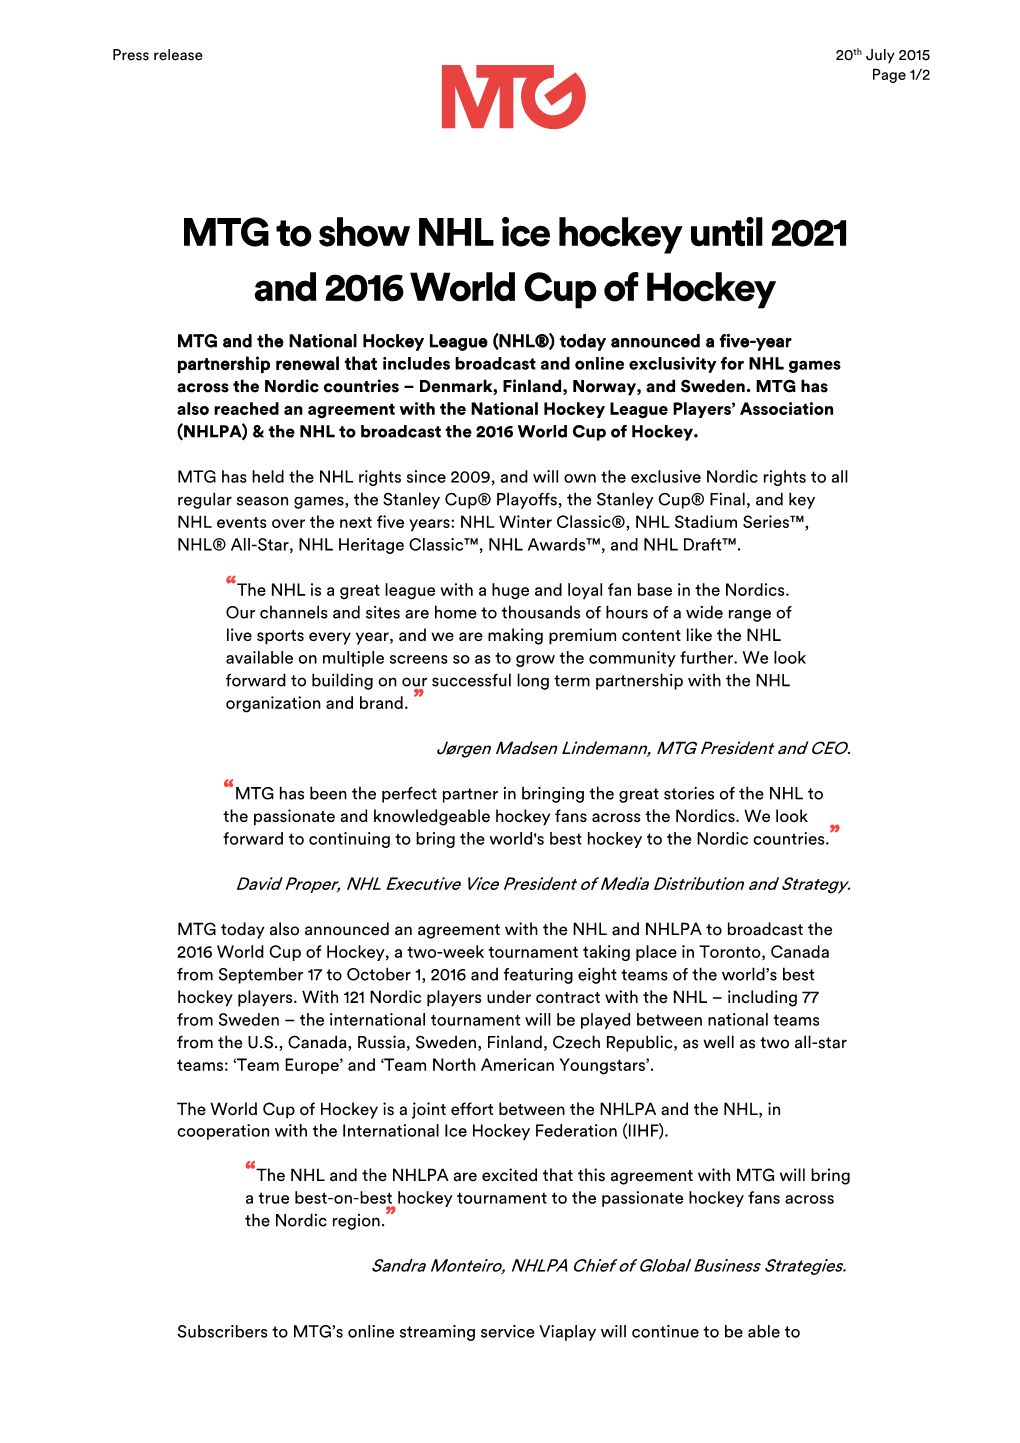 MTG to Show NHL Ice Hockey Until 2021 and 2016 World Cup of Hockey